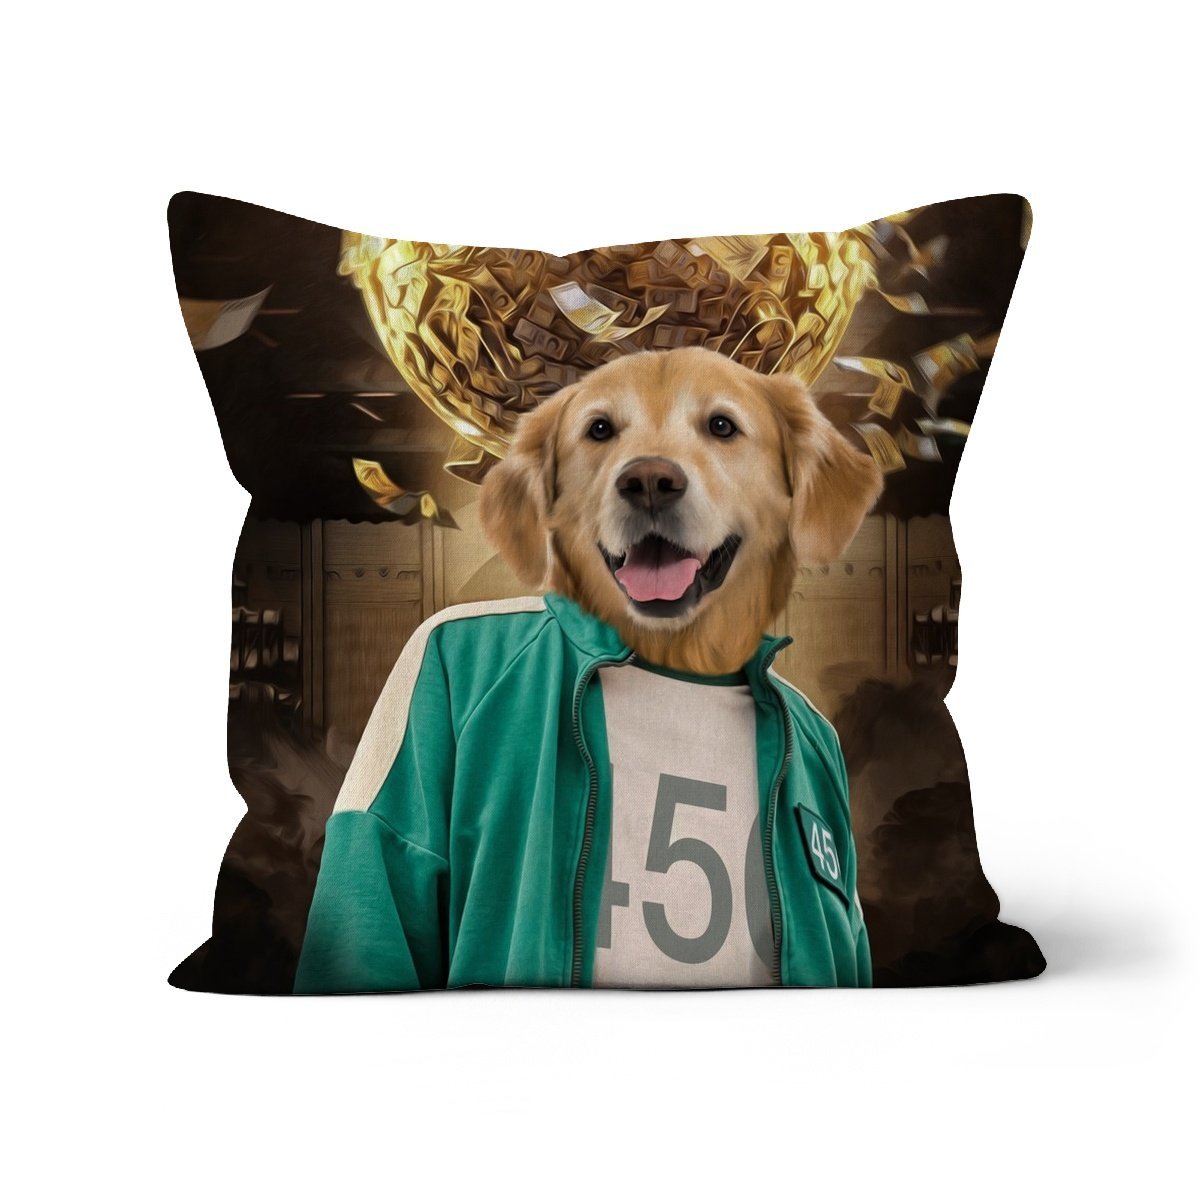 Player 456 (Squid Games Inspired): Custom Pet Cushion - Paw & Glory - #pet portraits# - #dog portraits# - #pet portraits uk#paw & glory, custom pet portrait pillow,pillows of your dog, pillow with pet picture, print pet on pillow, pet face pillow, pup pillows